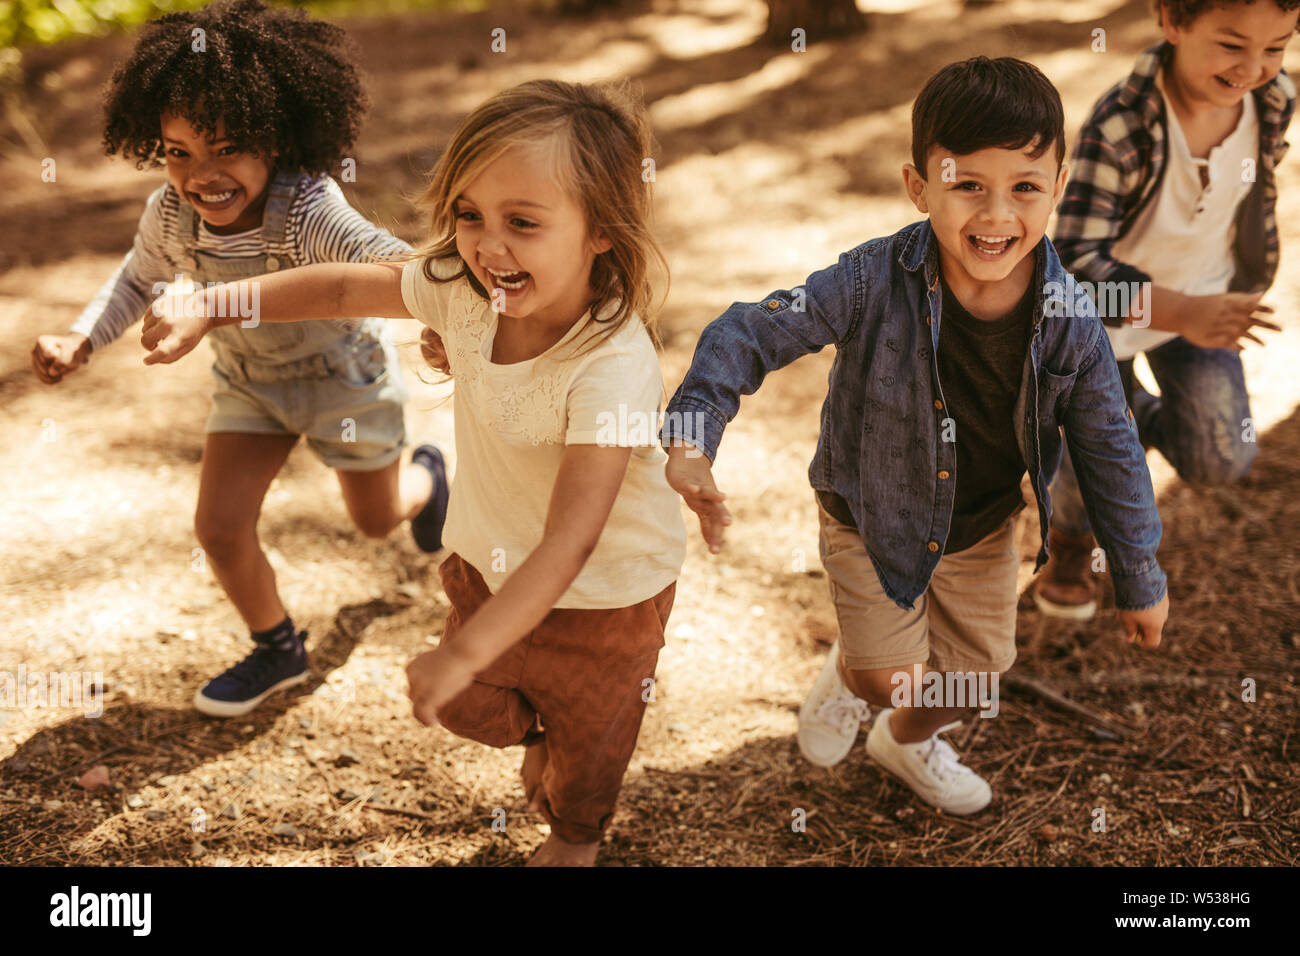 Adorable kids running up hill in a park. Group of children playing together in forest. Stock Photo